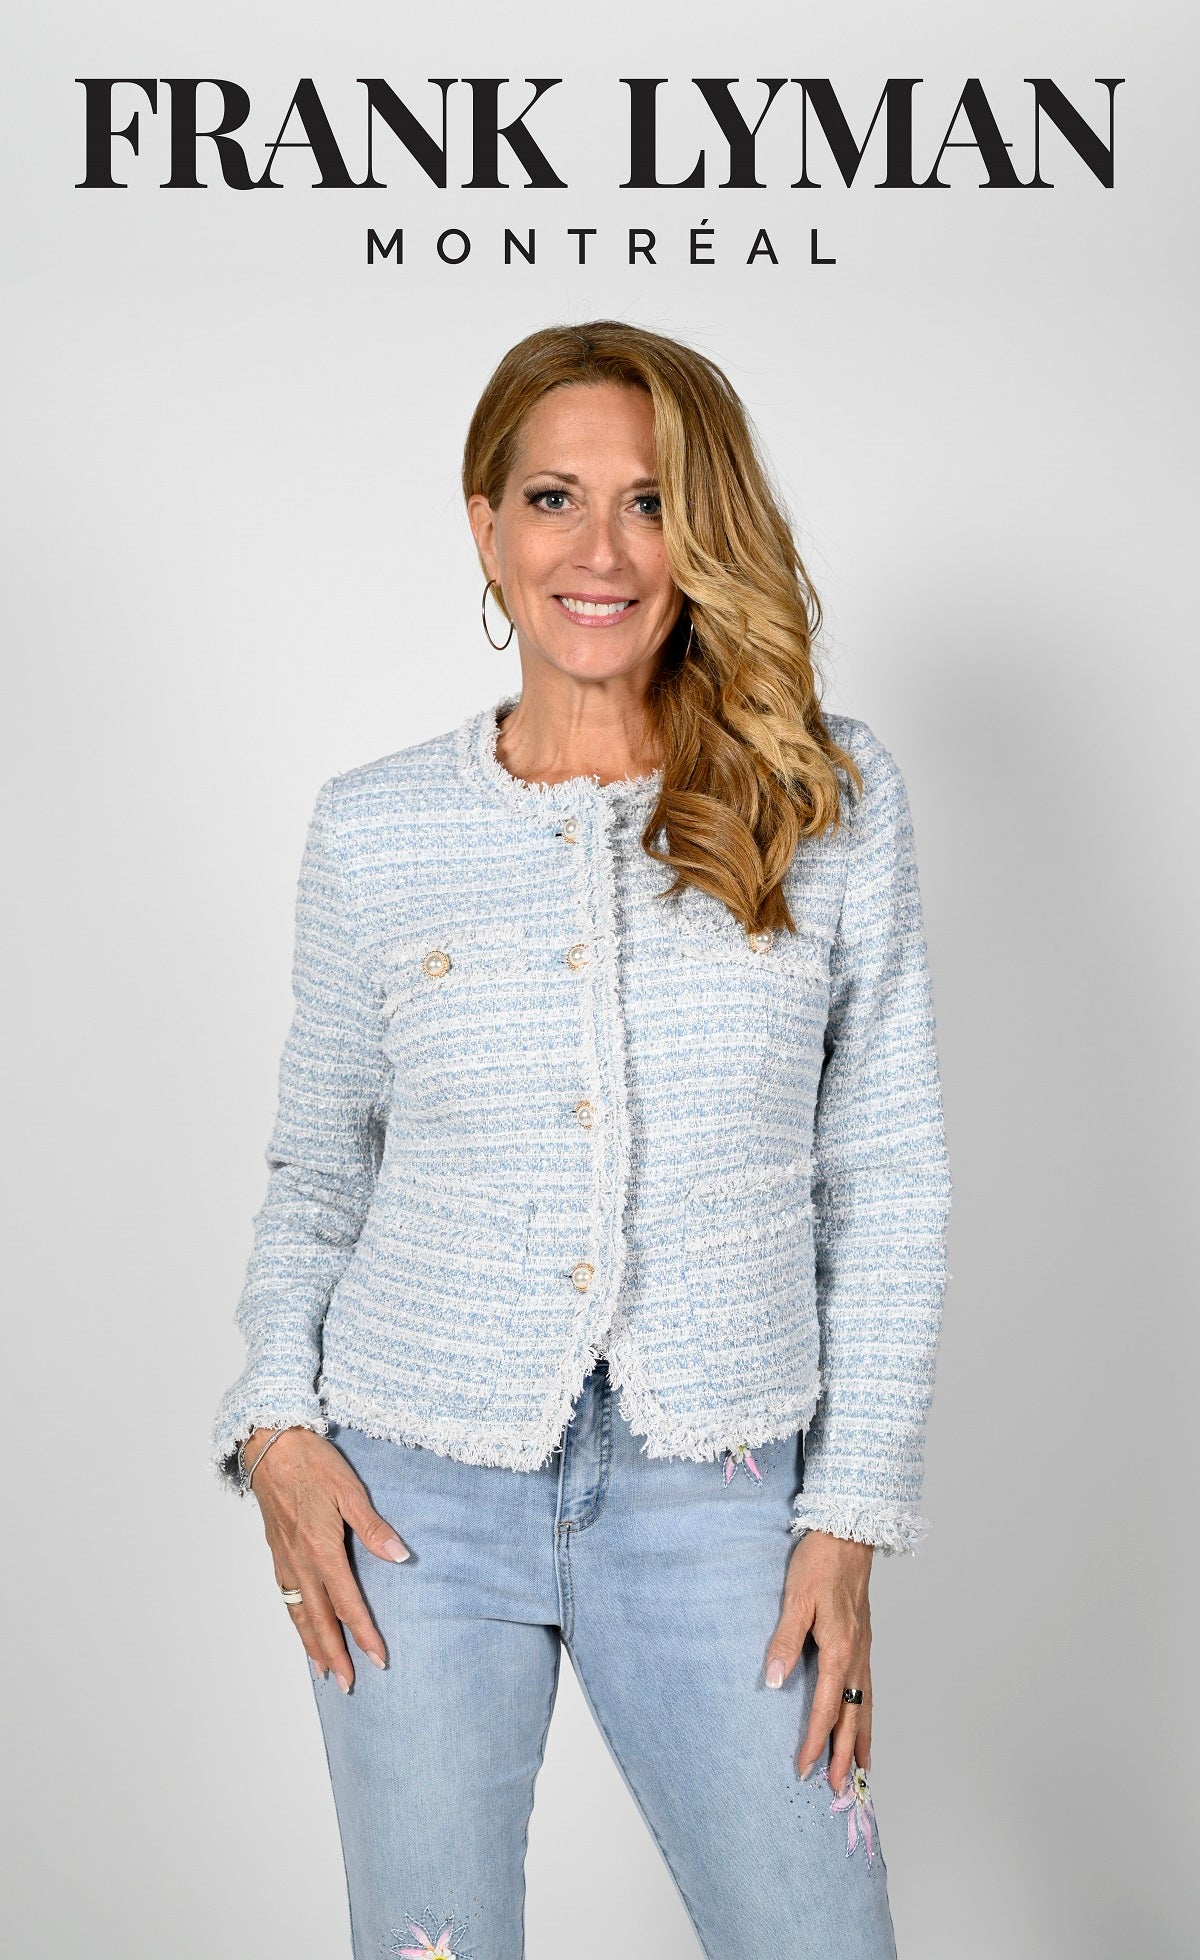 Buy Frank Lyman Montreal Jackets Online-Frank Lyman Montreal Jackets-Women's Jackets-Frank Lyman Montreal Spring 2023 Collection